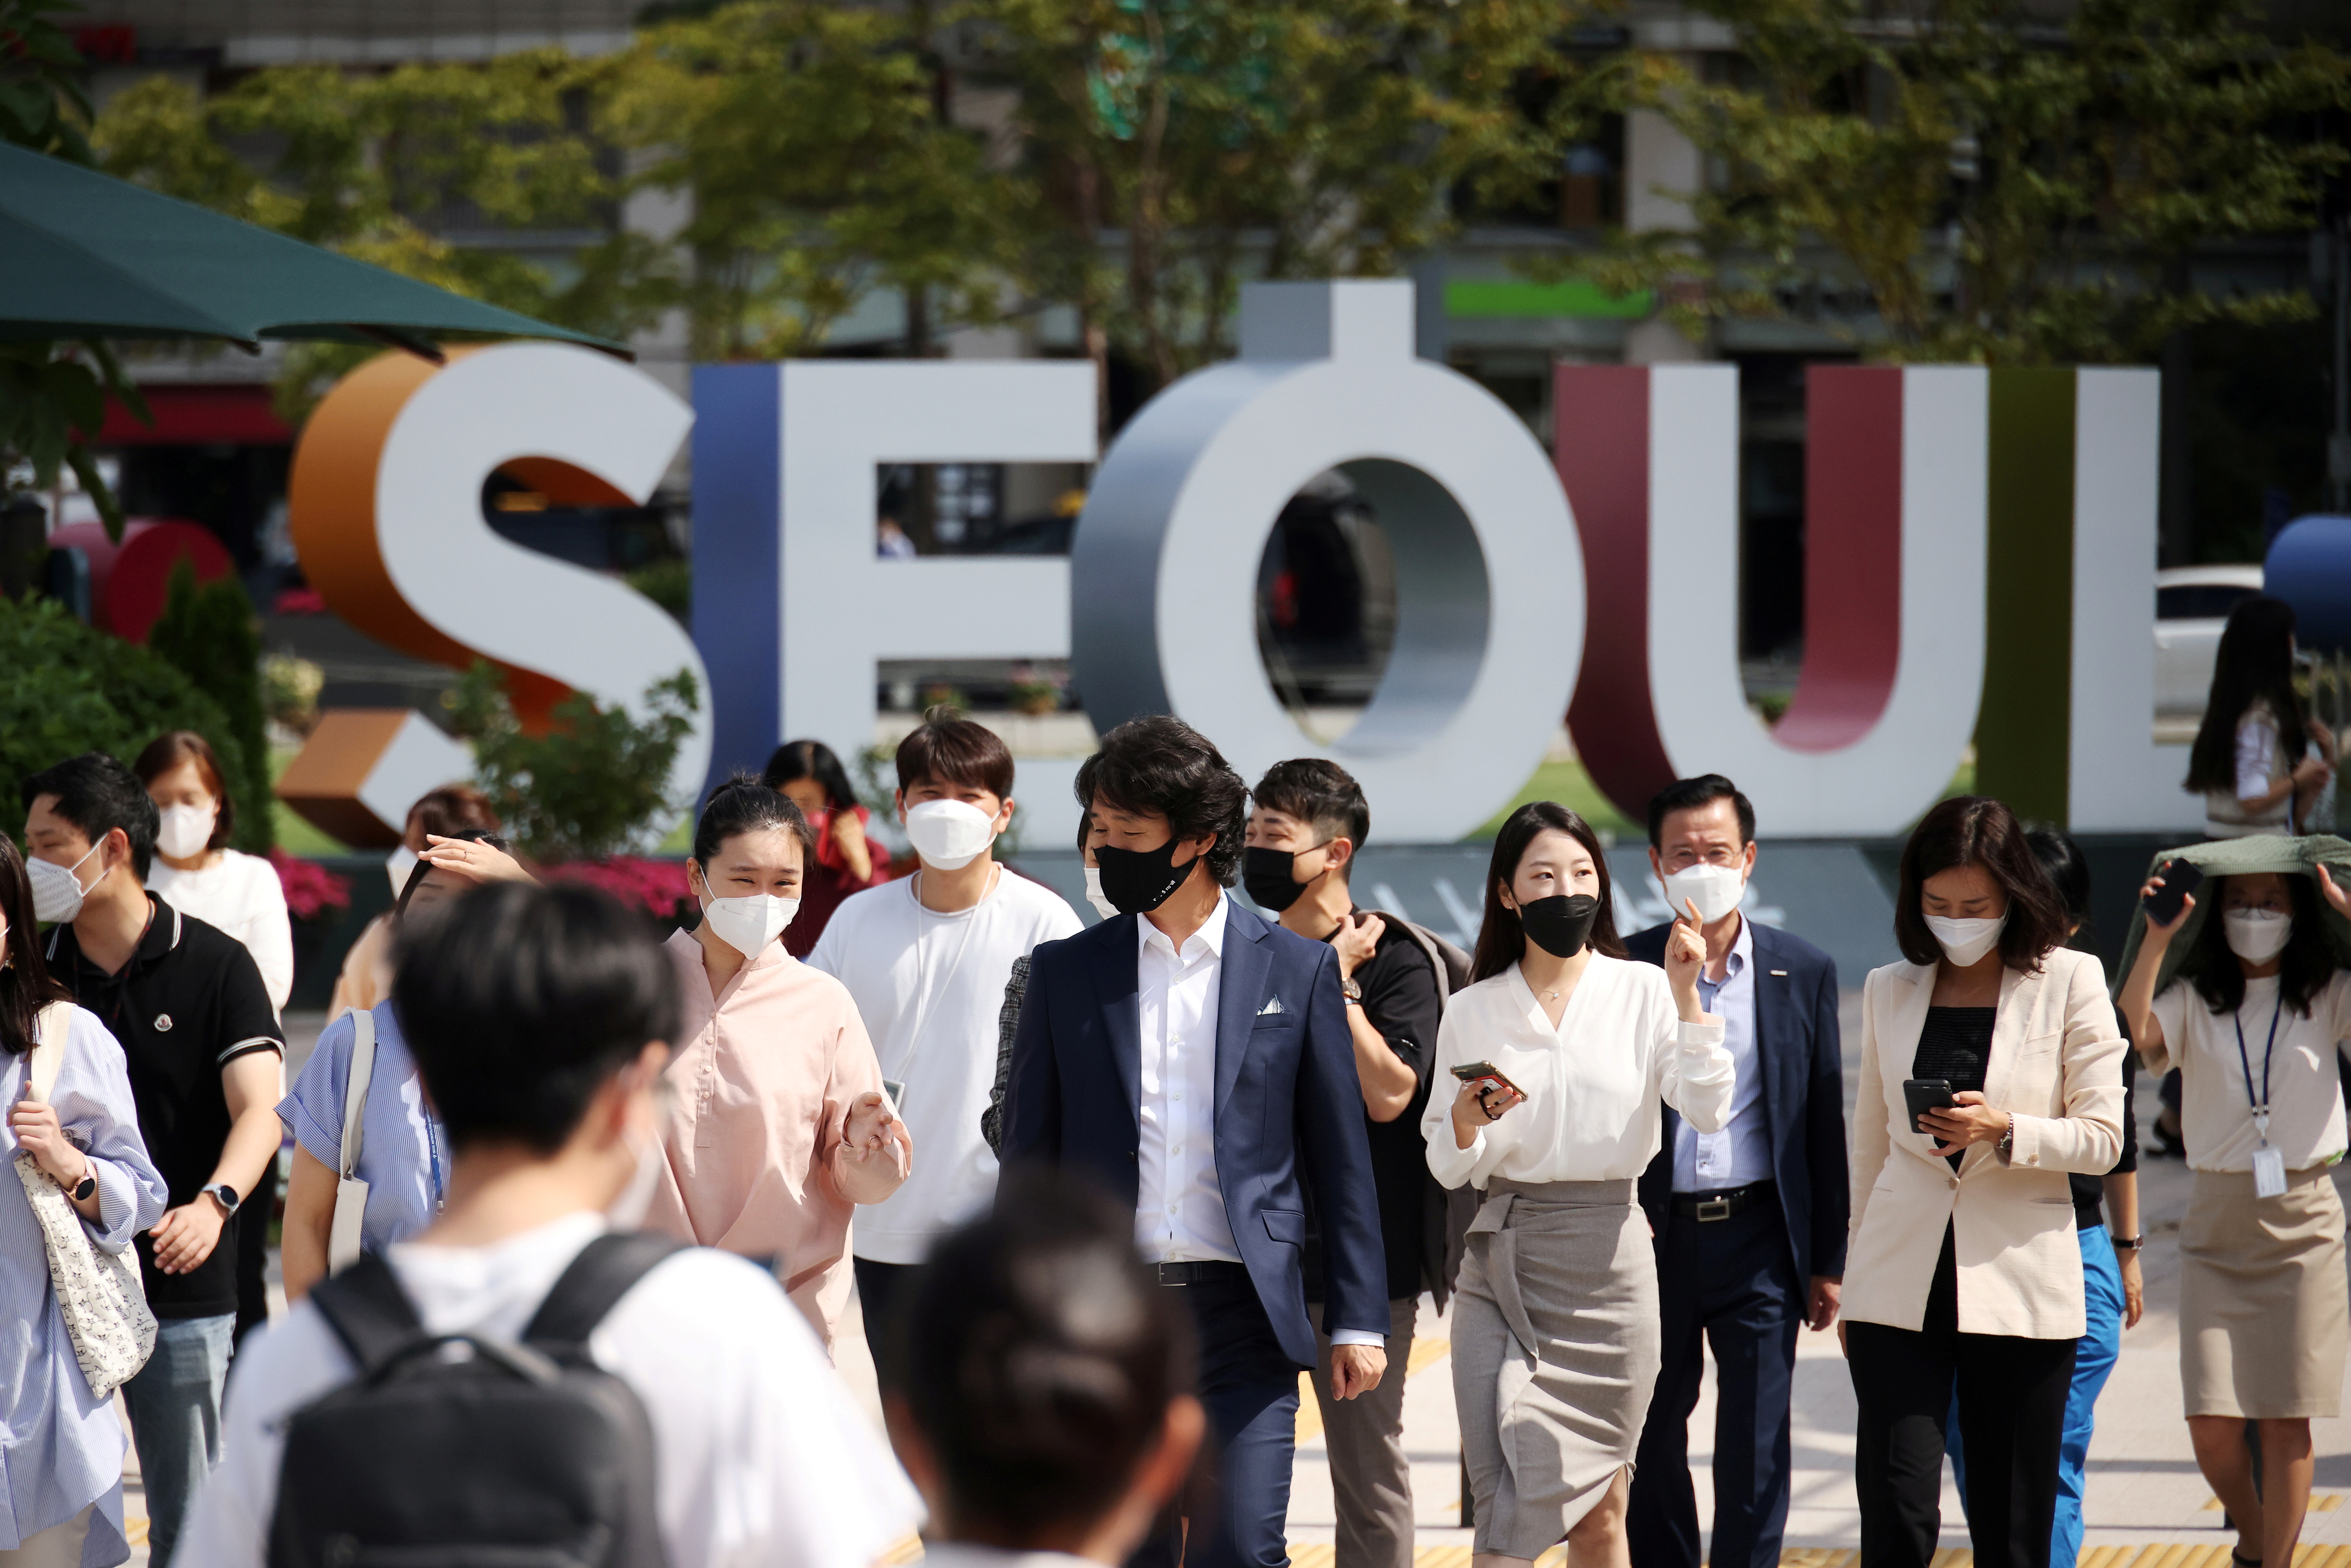 Commuters wearing masks to avoid contracting the coronavirus disease (COVID-19) walk on a zebra crossing in Seoul